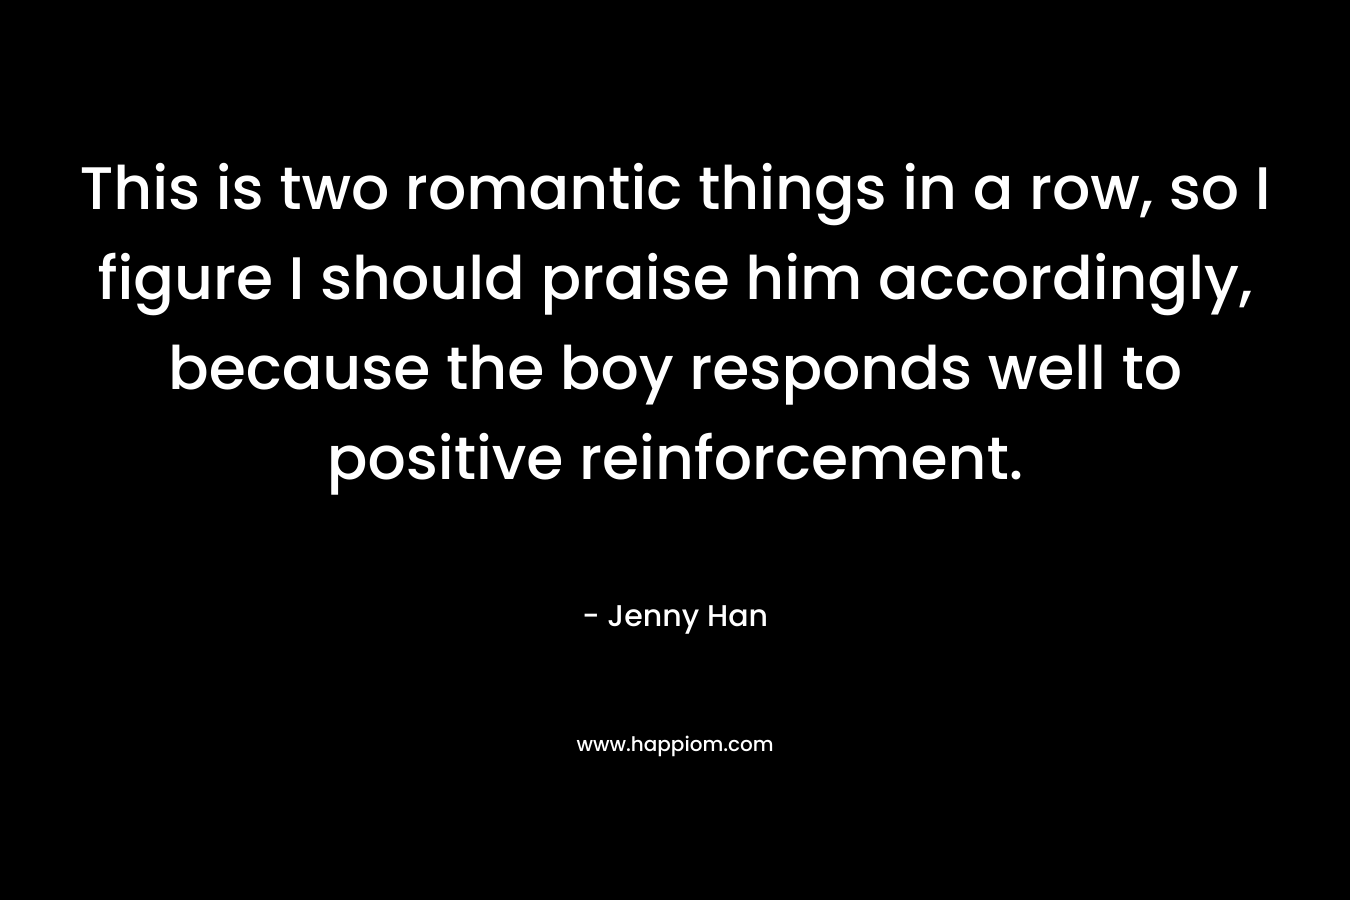 This is two romantic things in a row, so I figure I should praise him accordingly, because the boy responds well to positive reinforcement. – Jenny Han